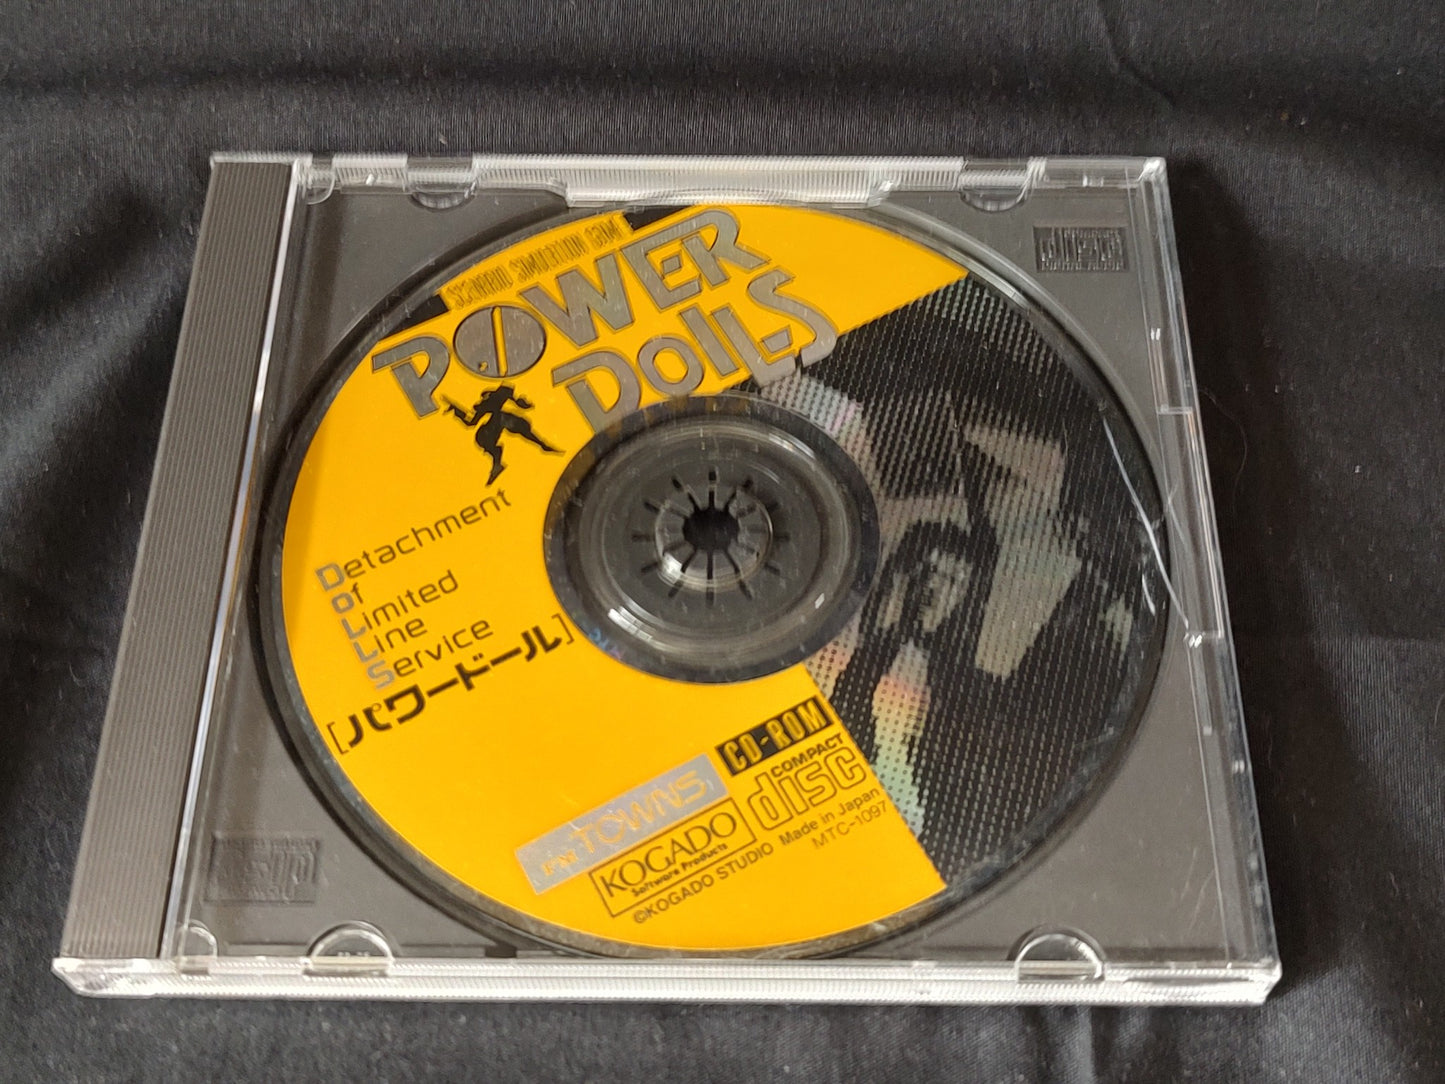 POWER DoLLS FM TOWNS Marty Game, Disk, Manual and Box set, Working-f0513-